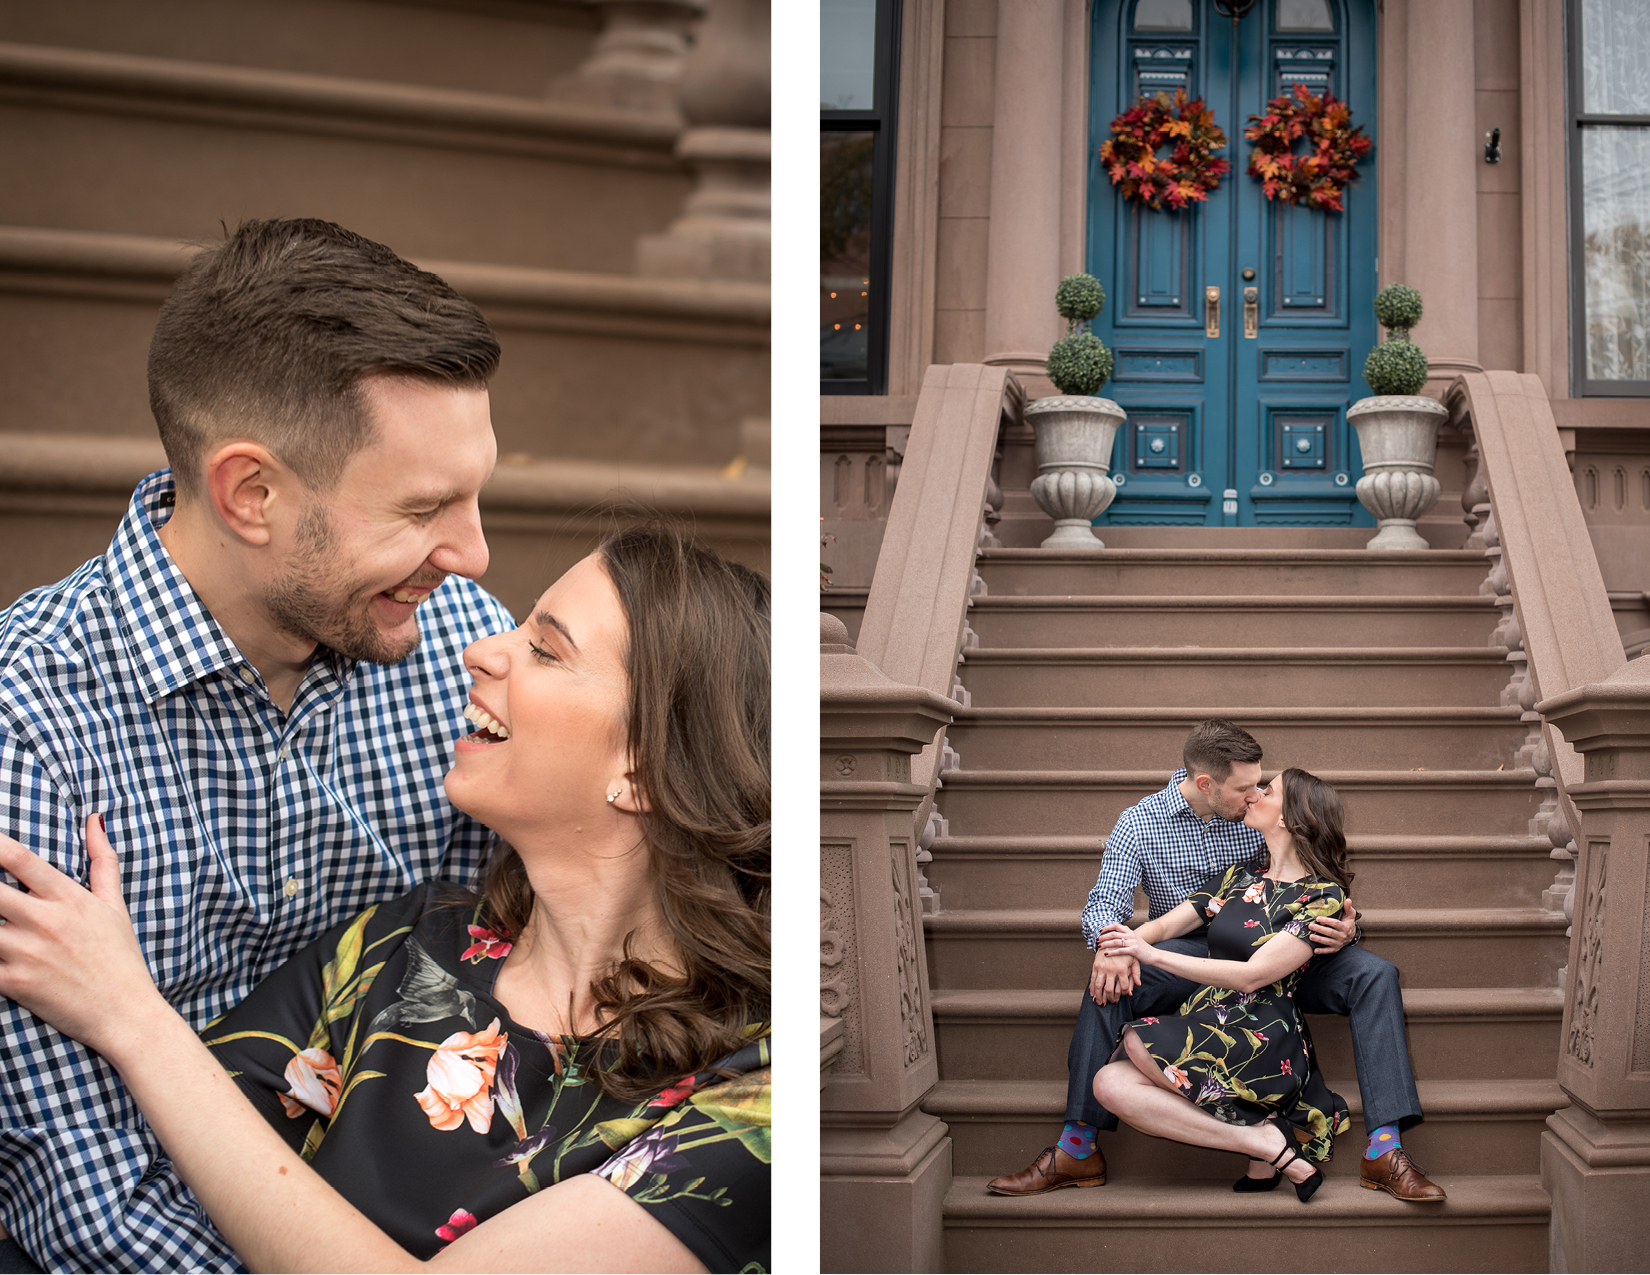 Patrick and Patricia Engagement :: Hoboken, NJ – Michelle Lala Clark Photography